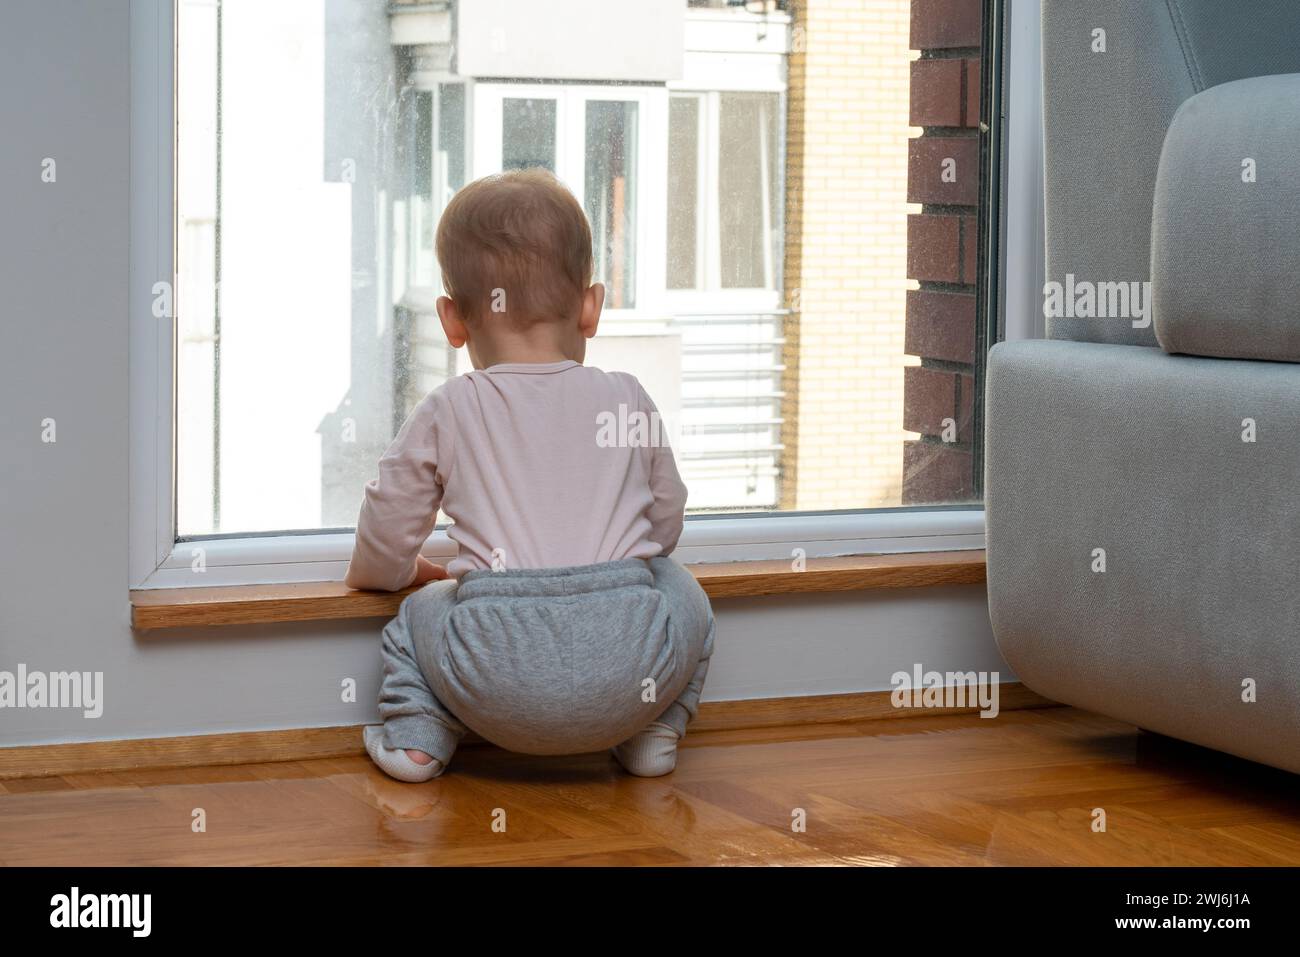 Baby waits by the window for dad to come home. Concept of family and longing Stock Photo